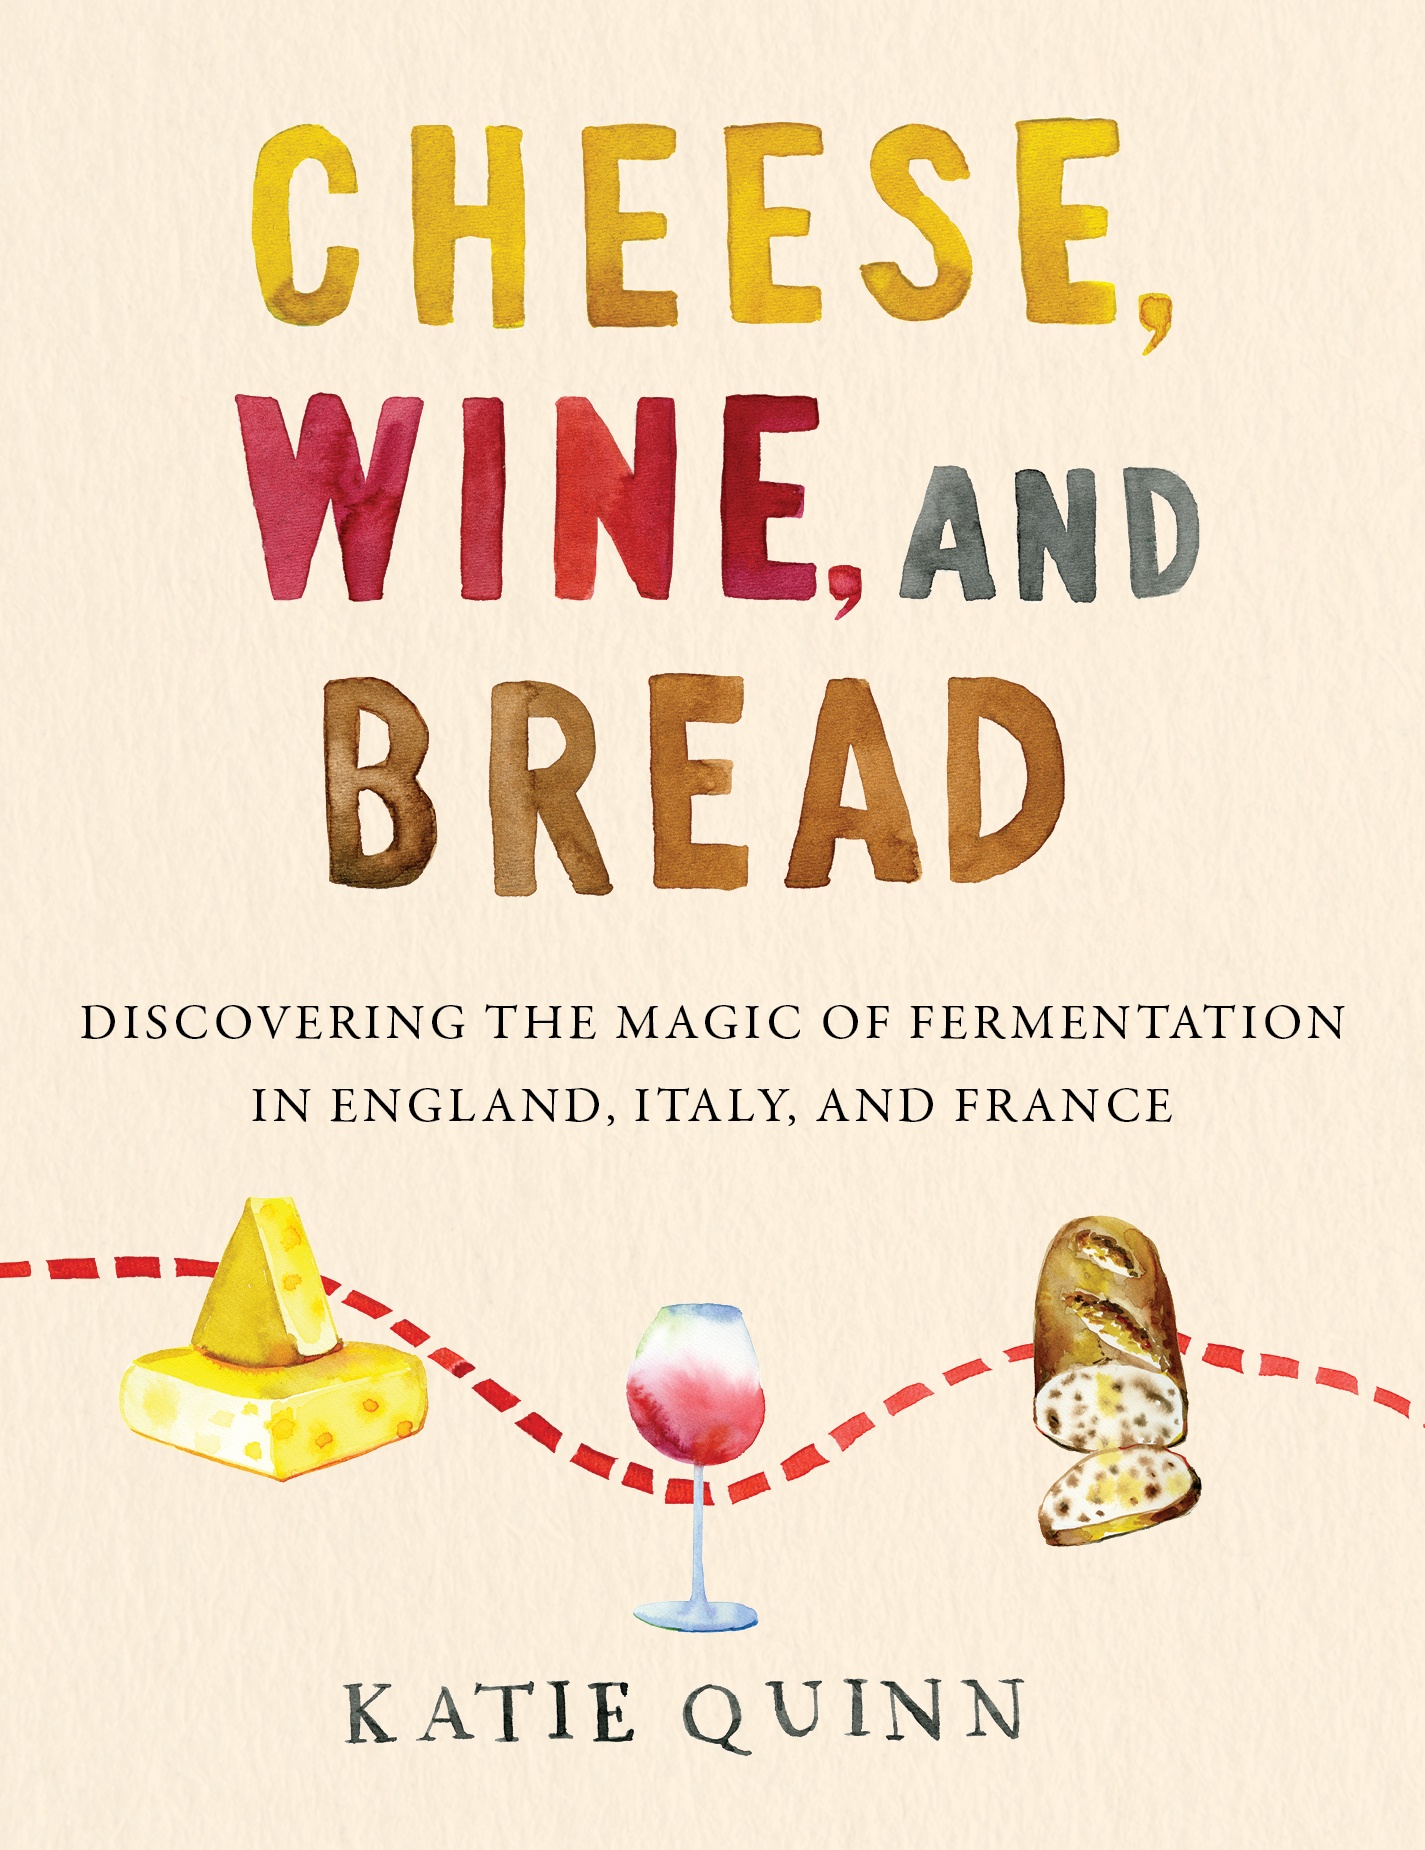 Virtual event with Katie Quinn/Cheese, Wine, and Bread